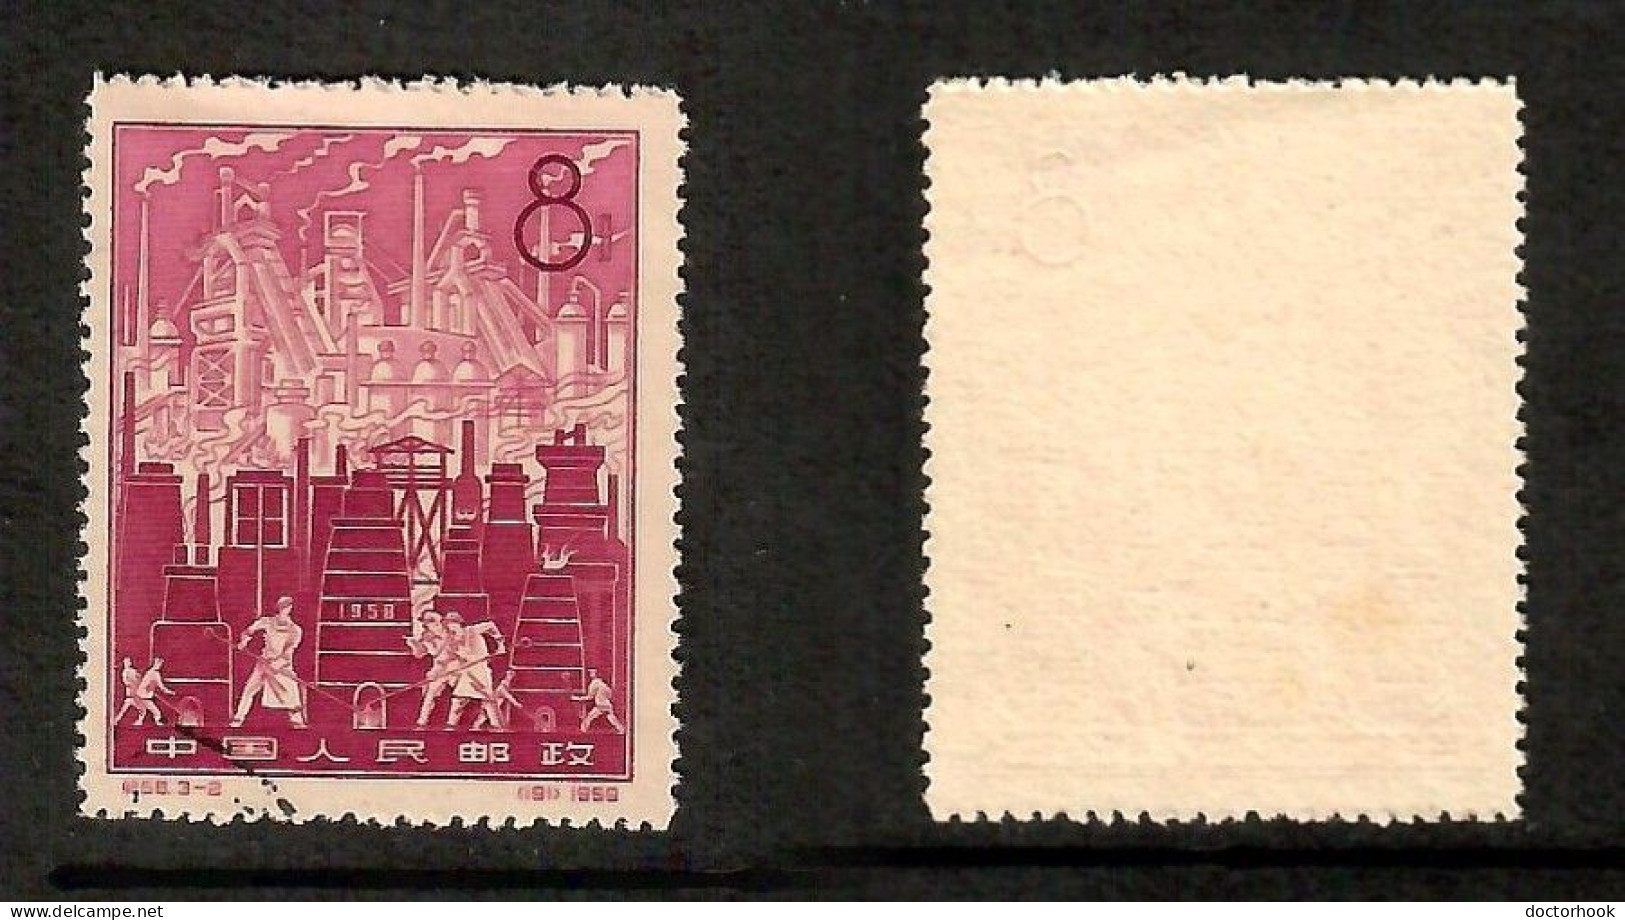 PEOPLES REPUBLIC Of CHINA   Scott # 403 USED (CONDITION AS PER SCAN) (Stamp Scan # 1006-10) - Used Stamps